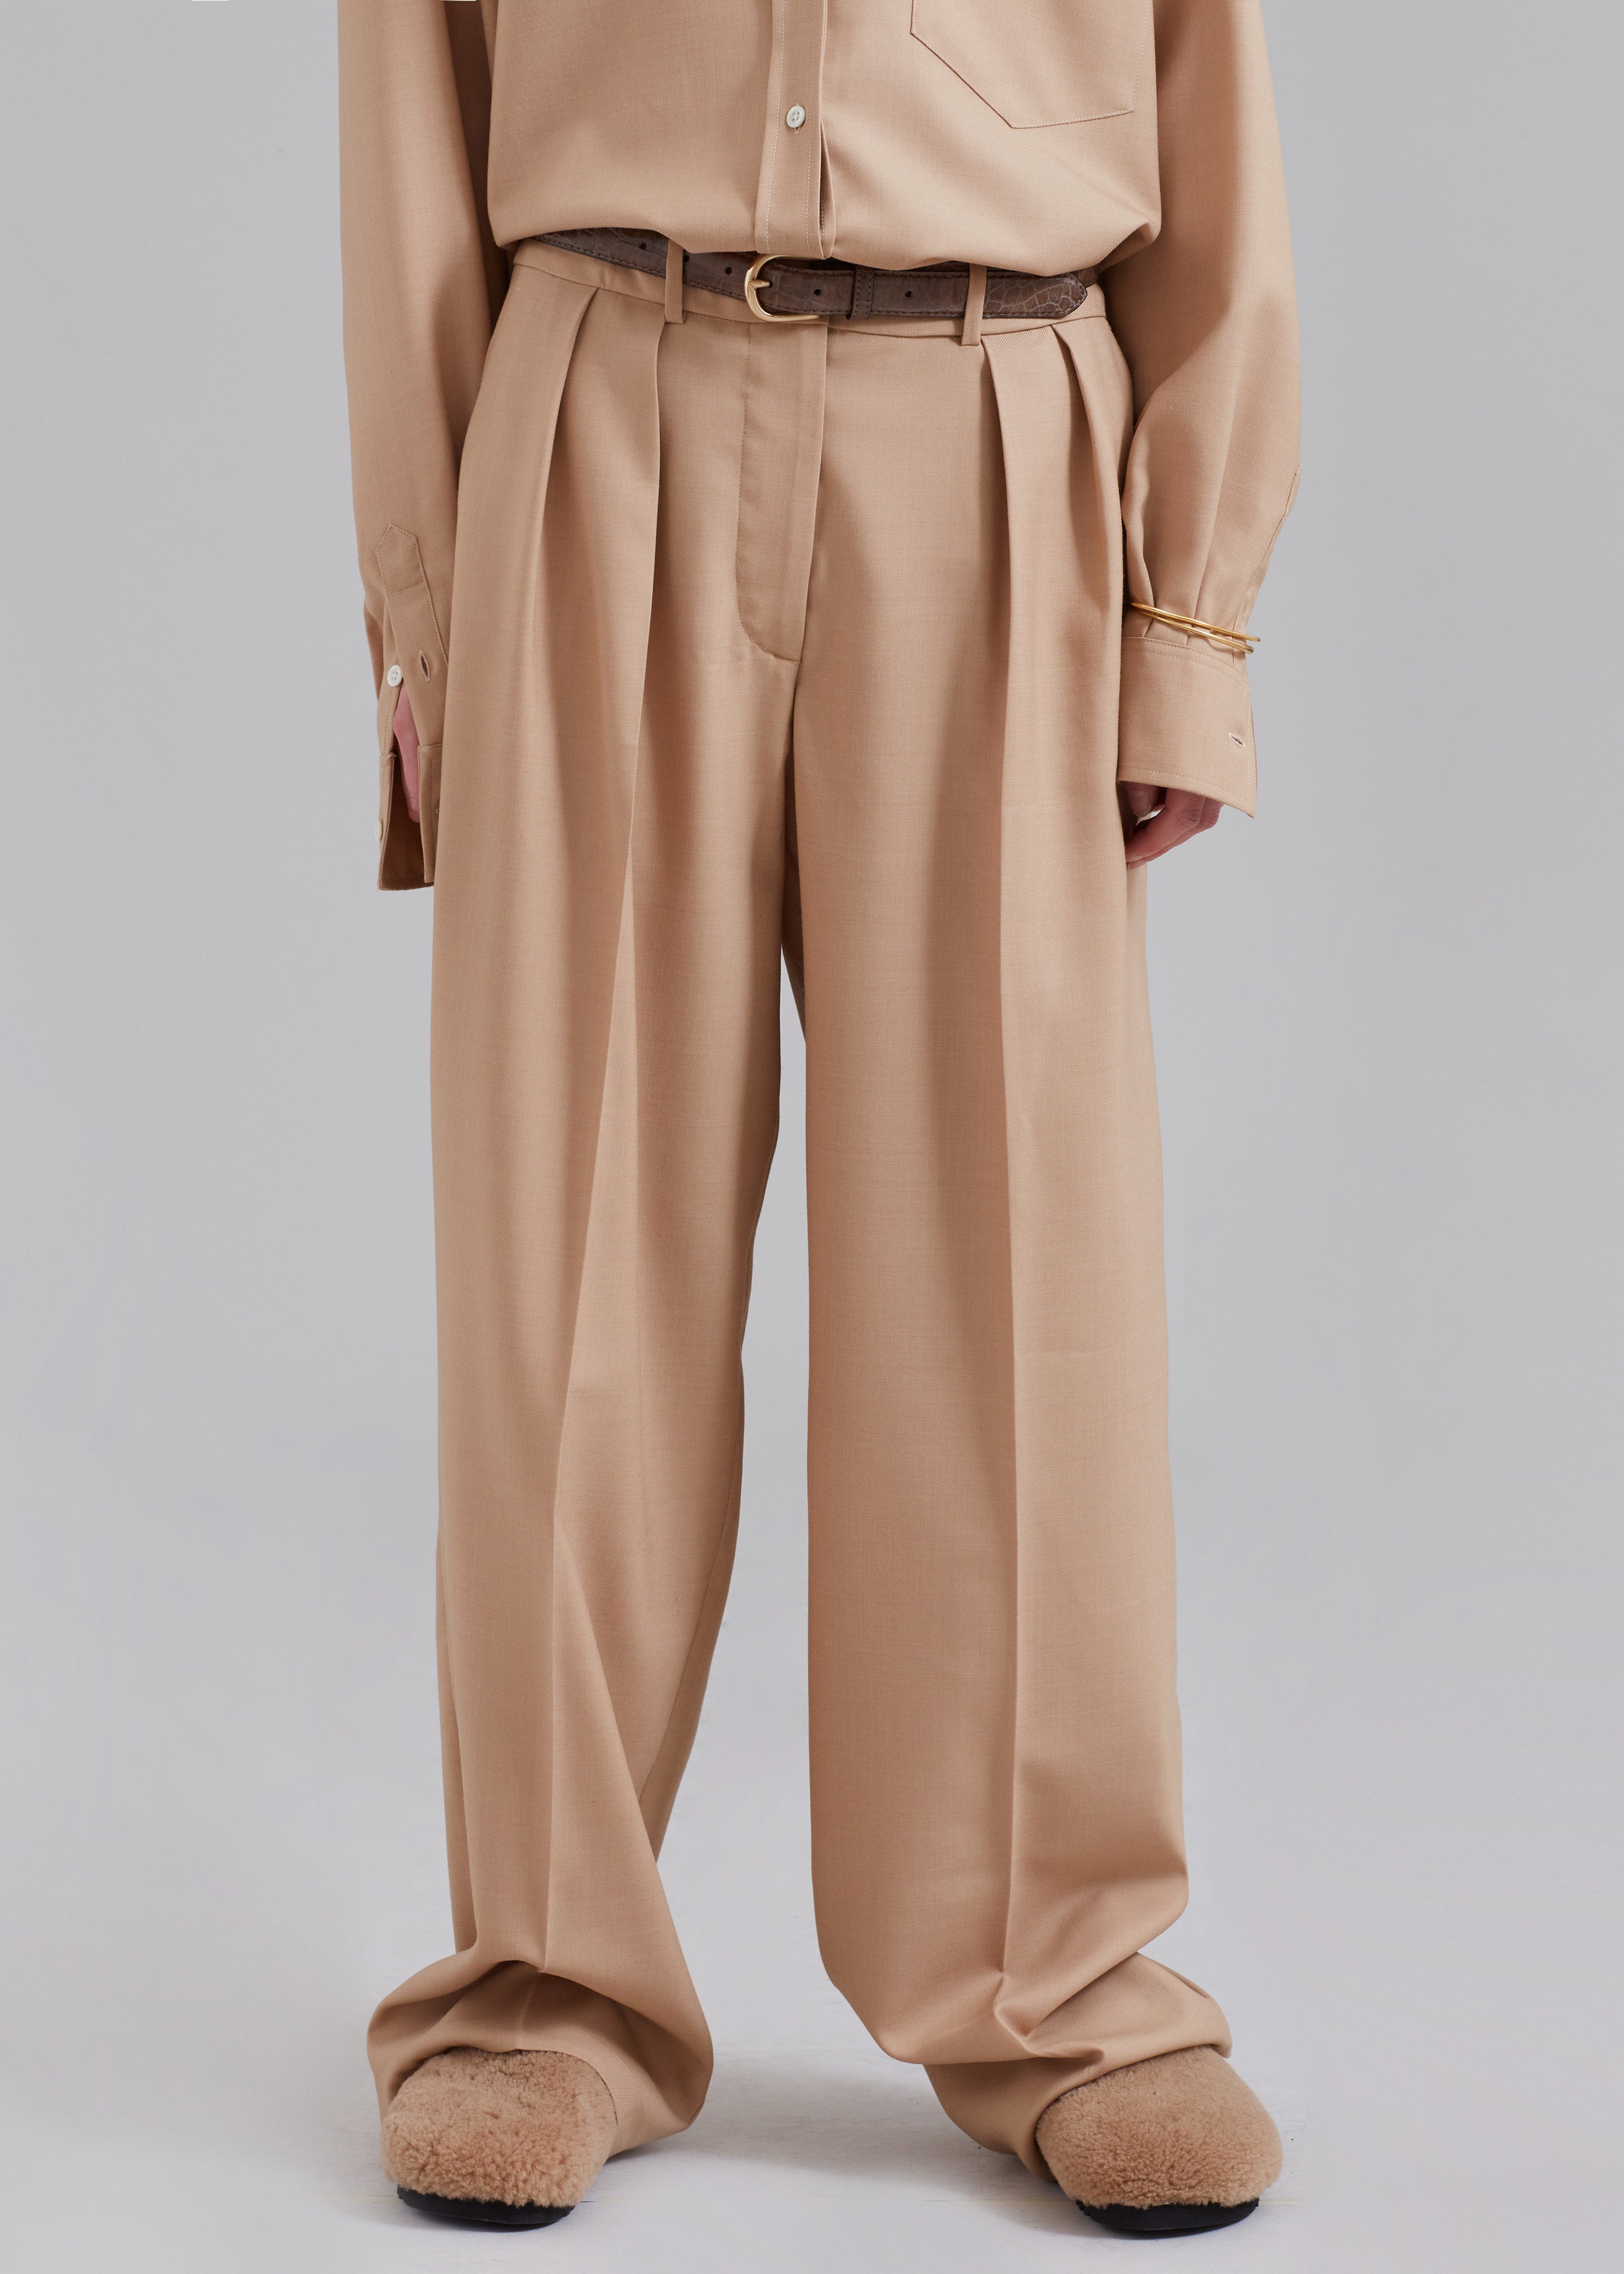 Tansy Pleated Twill Trousers - Camel - 2